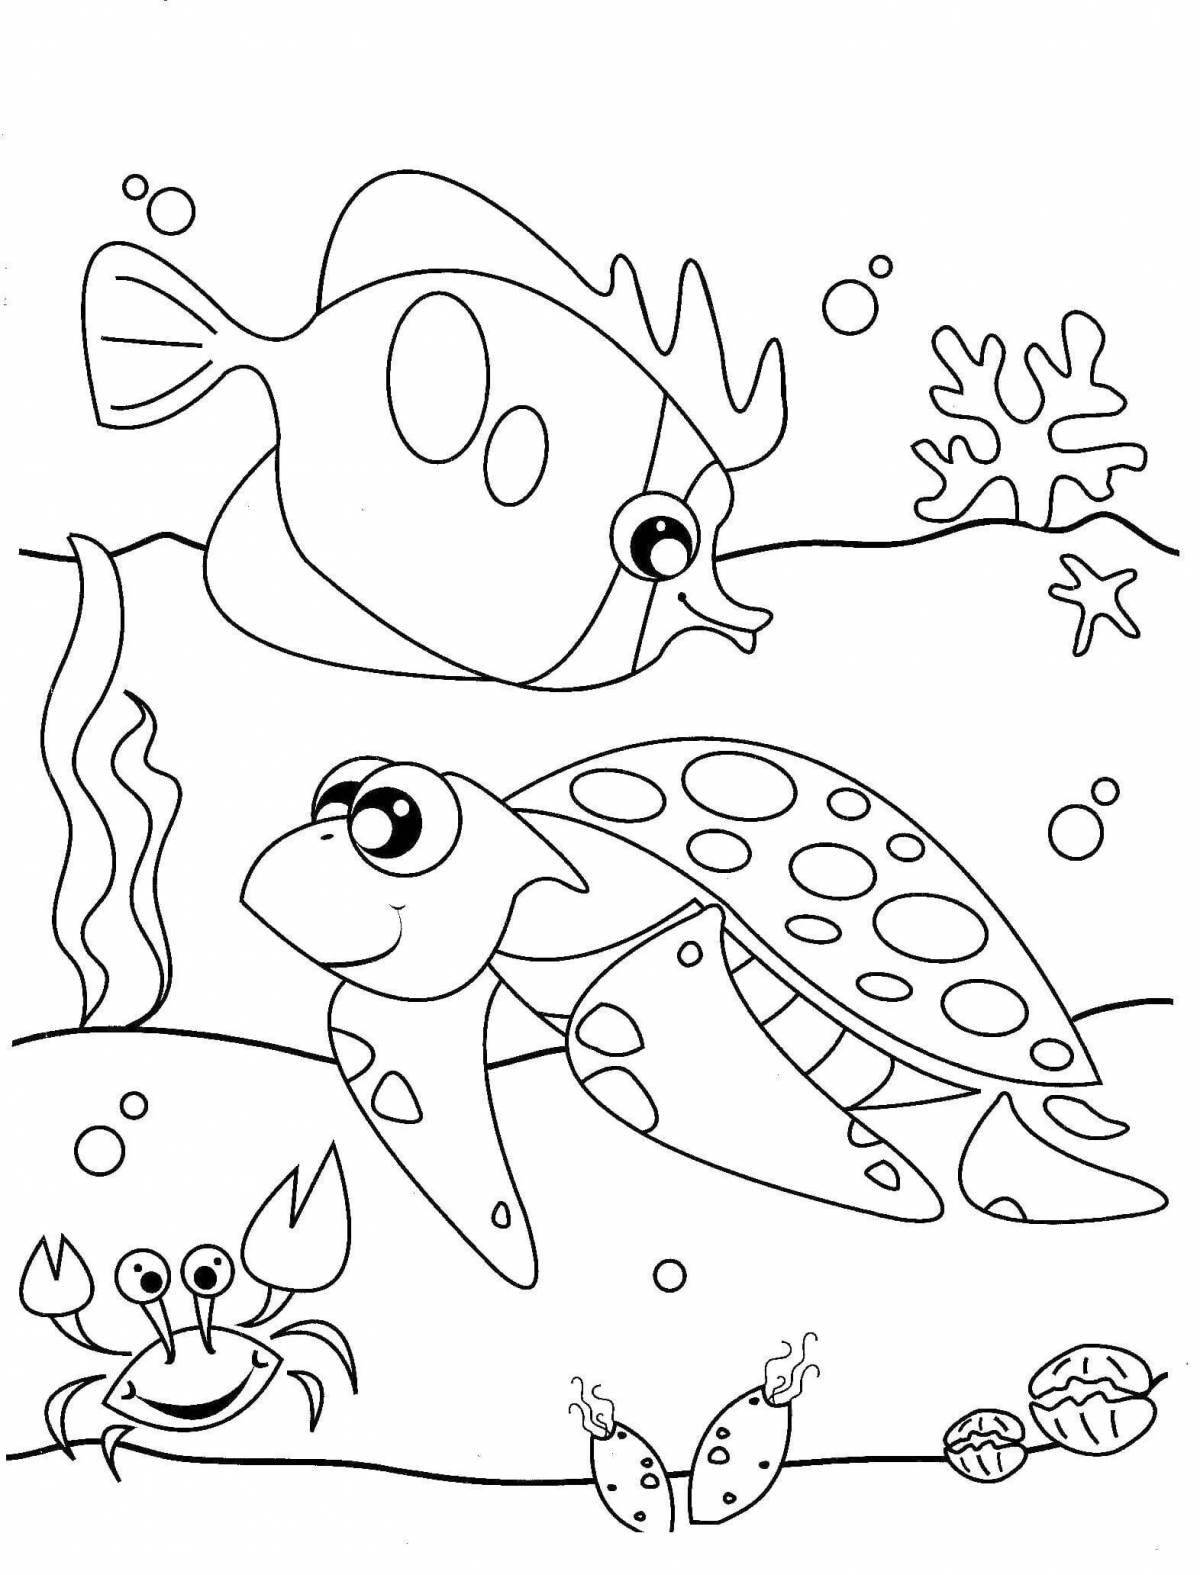 Inhabitants of the seas and oceans for children #12